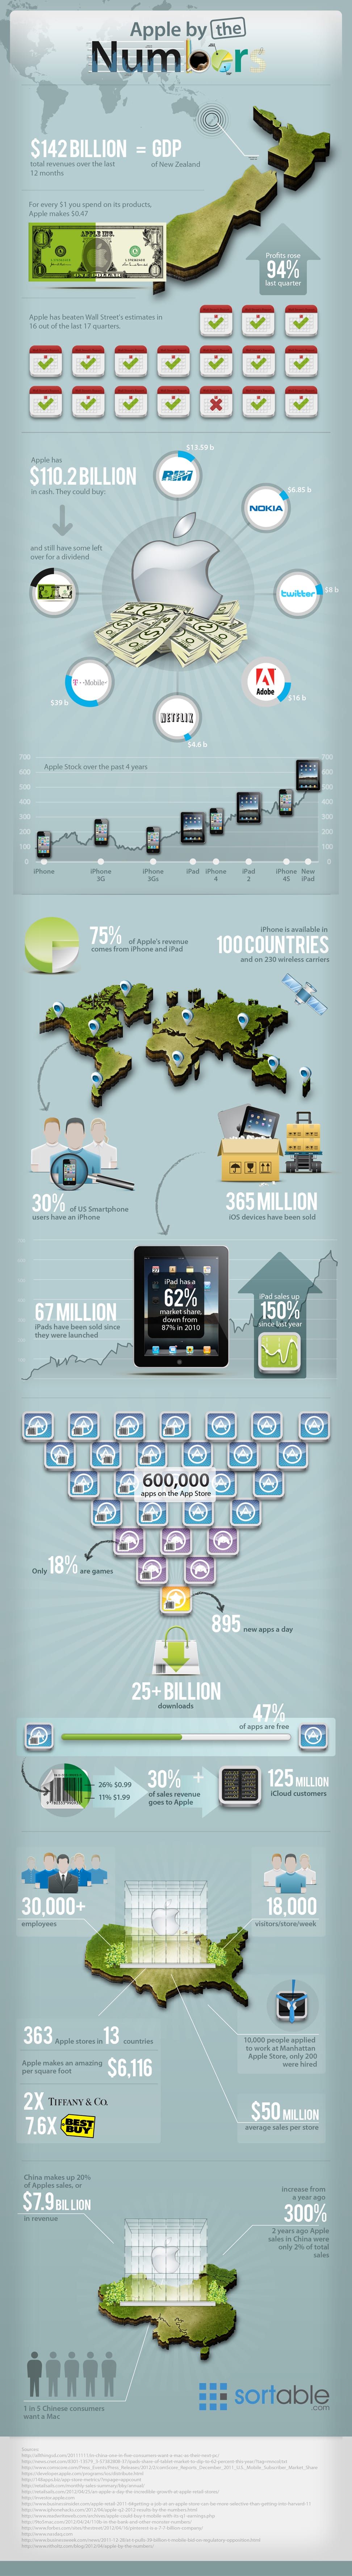 Apple by the Numbers [INFOGRAPHIC]